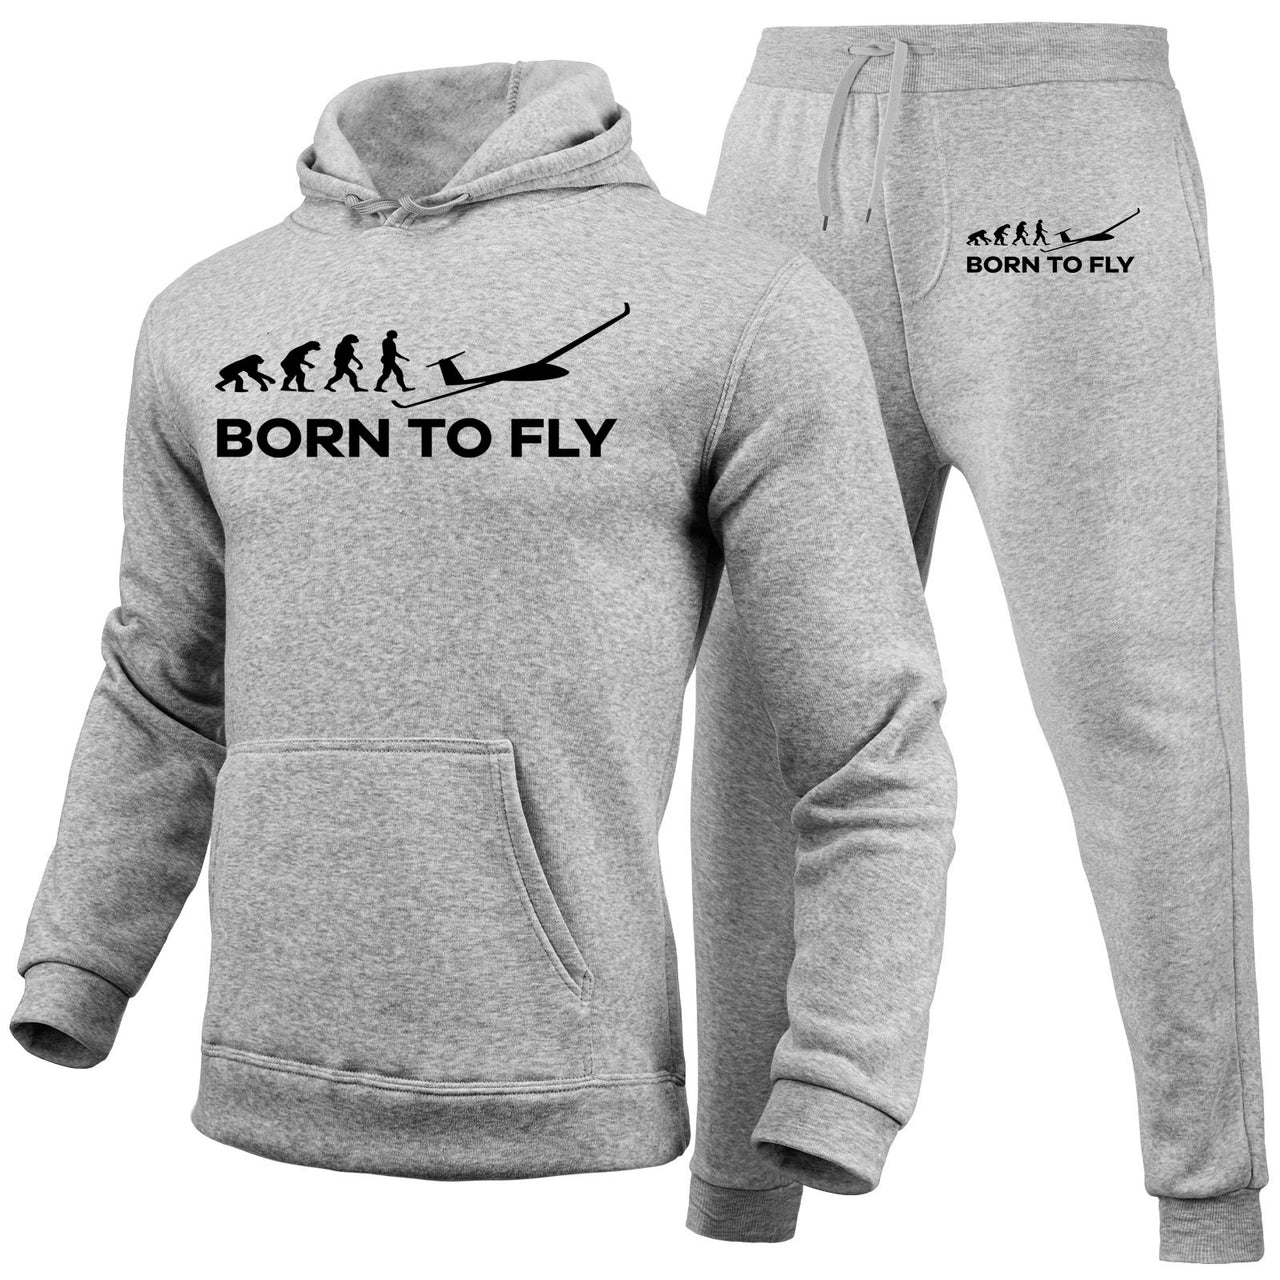 Born To Fly Glider Designed Hoodies & Sweatpants Set